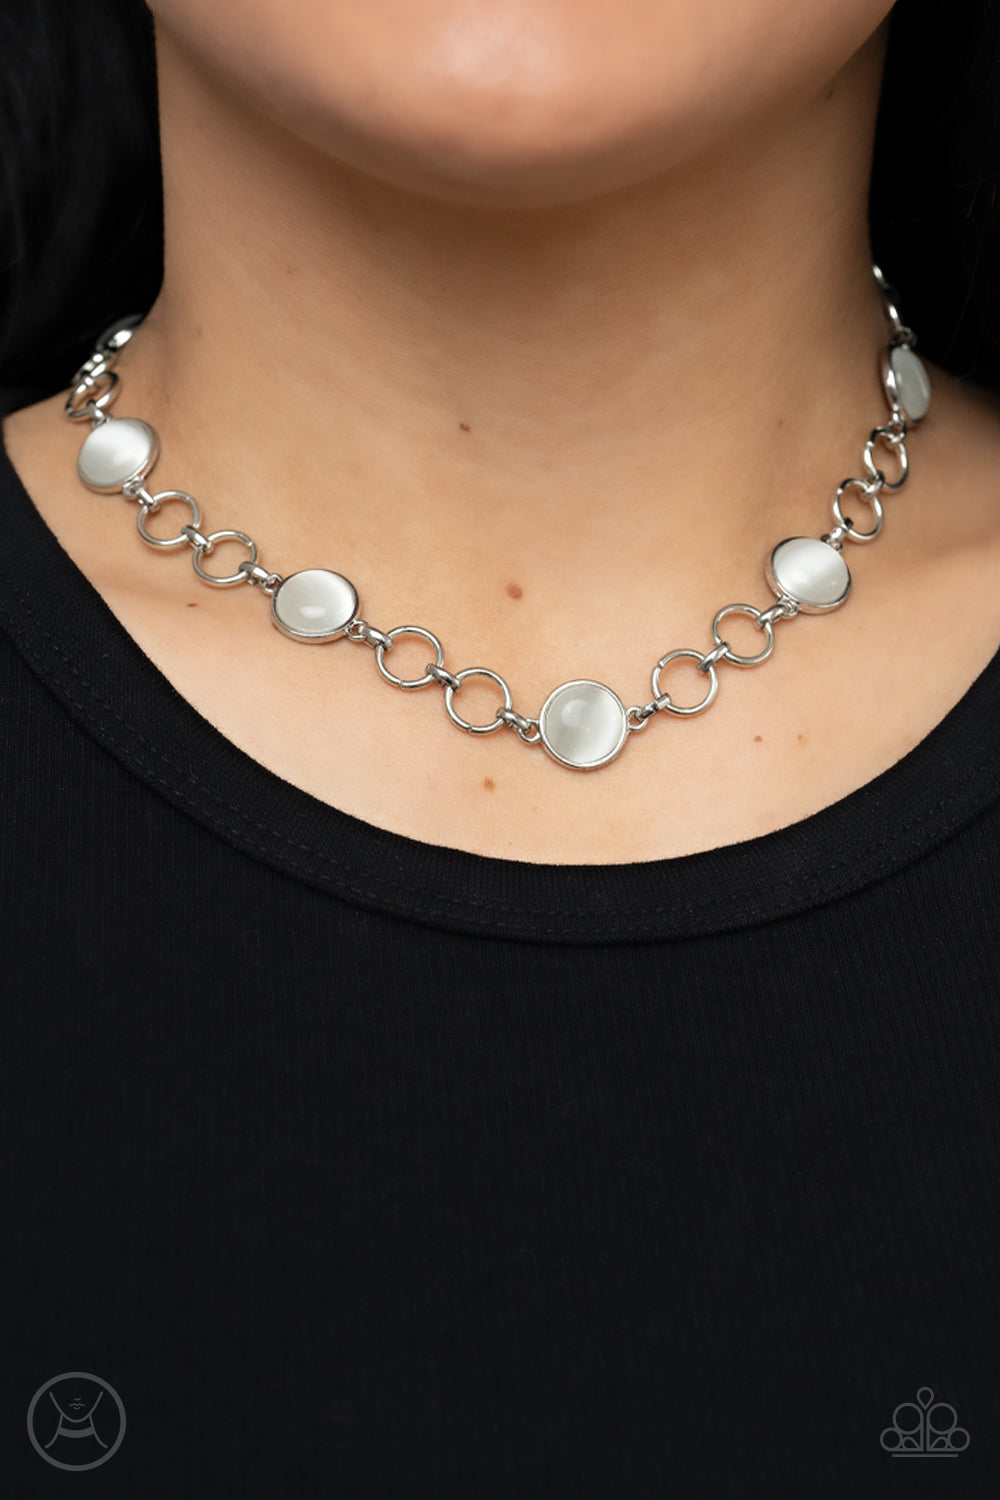 Dreamy Distractions White Choker Necklace